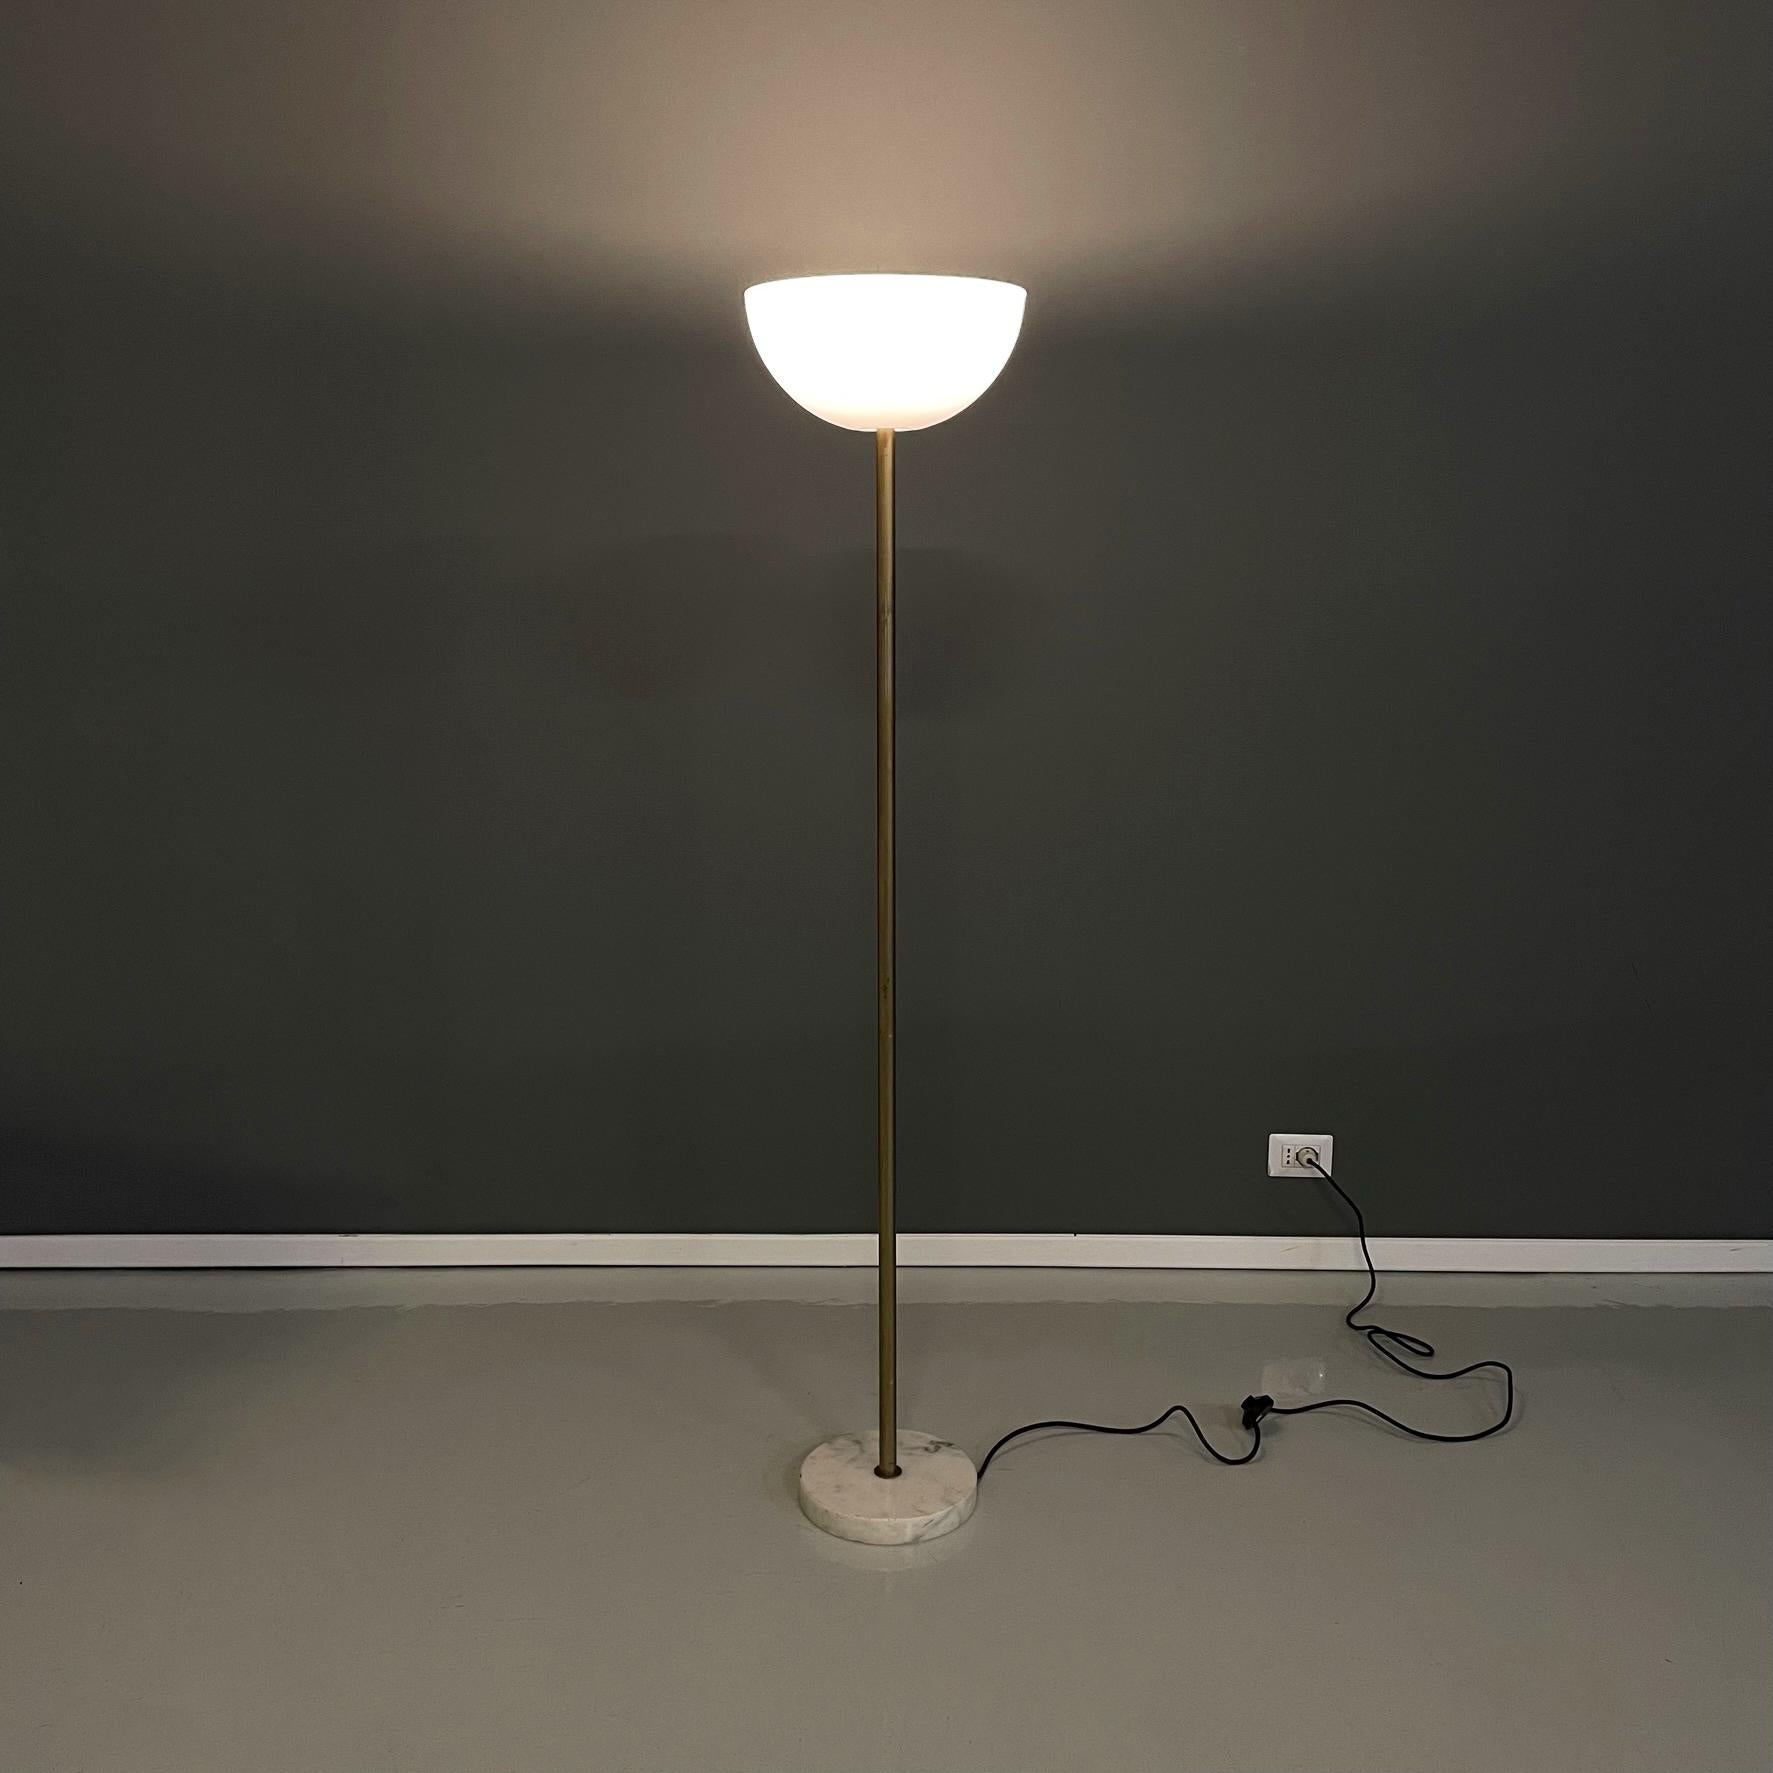 Italian modern Floor lamp in opaline plexiglass, marble and golden metal, 1970s
Floor lamp with round base in light marble. The hemisphere diffuser is in opal plexiglass. The central structure is composed of a metal stem with a golden finish.
It